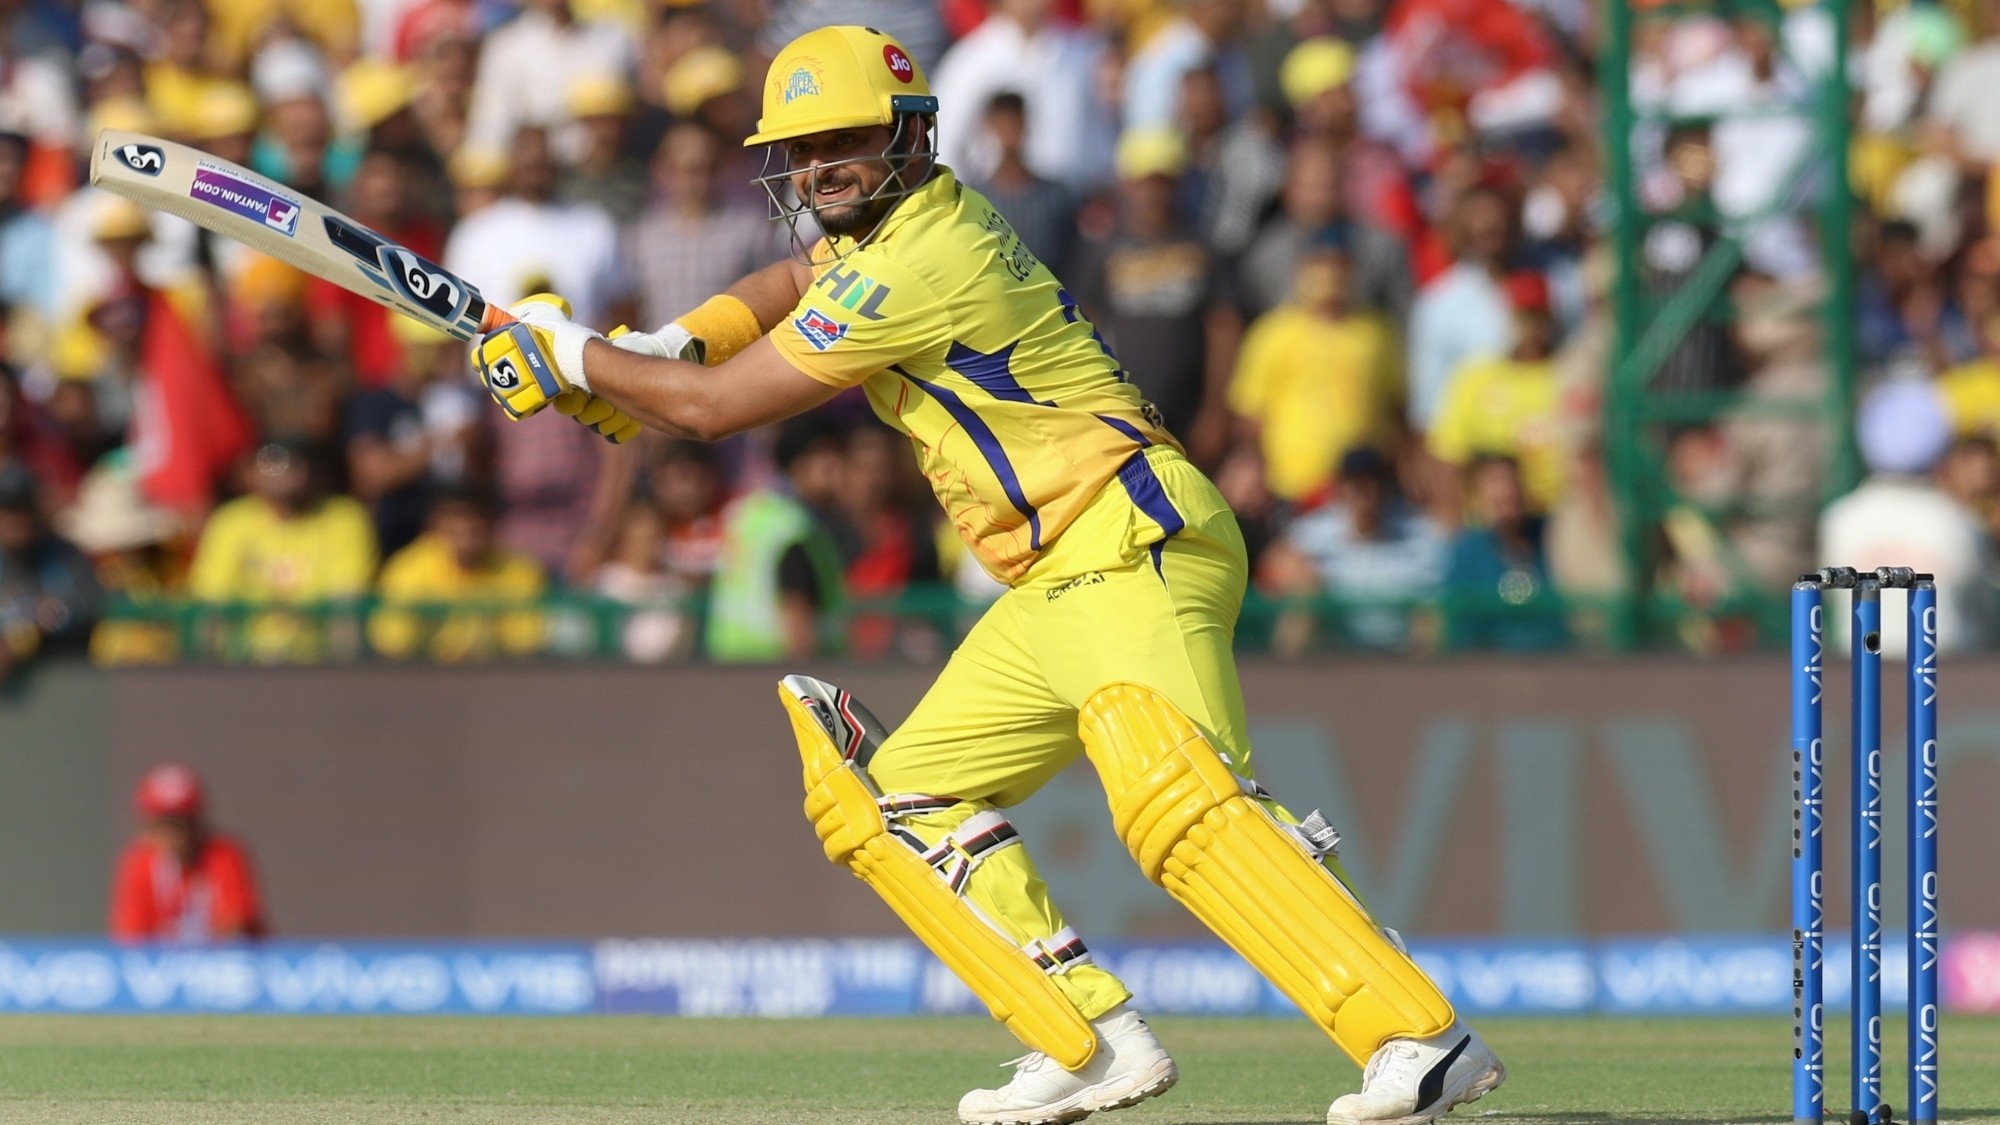 Suresh Raina likely to be released by CSK ahead of IPL 2021 auction, says report